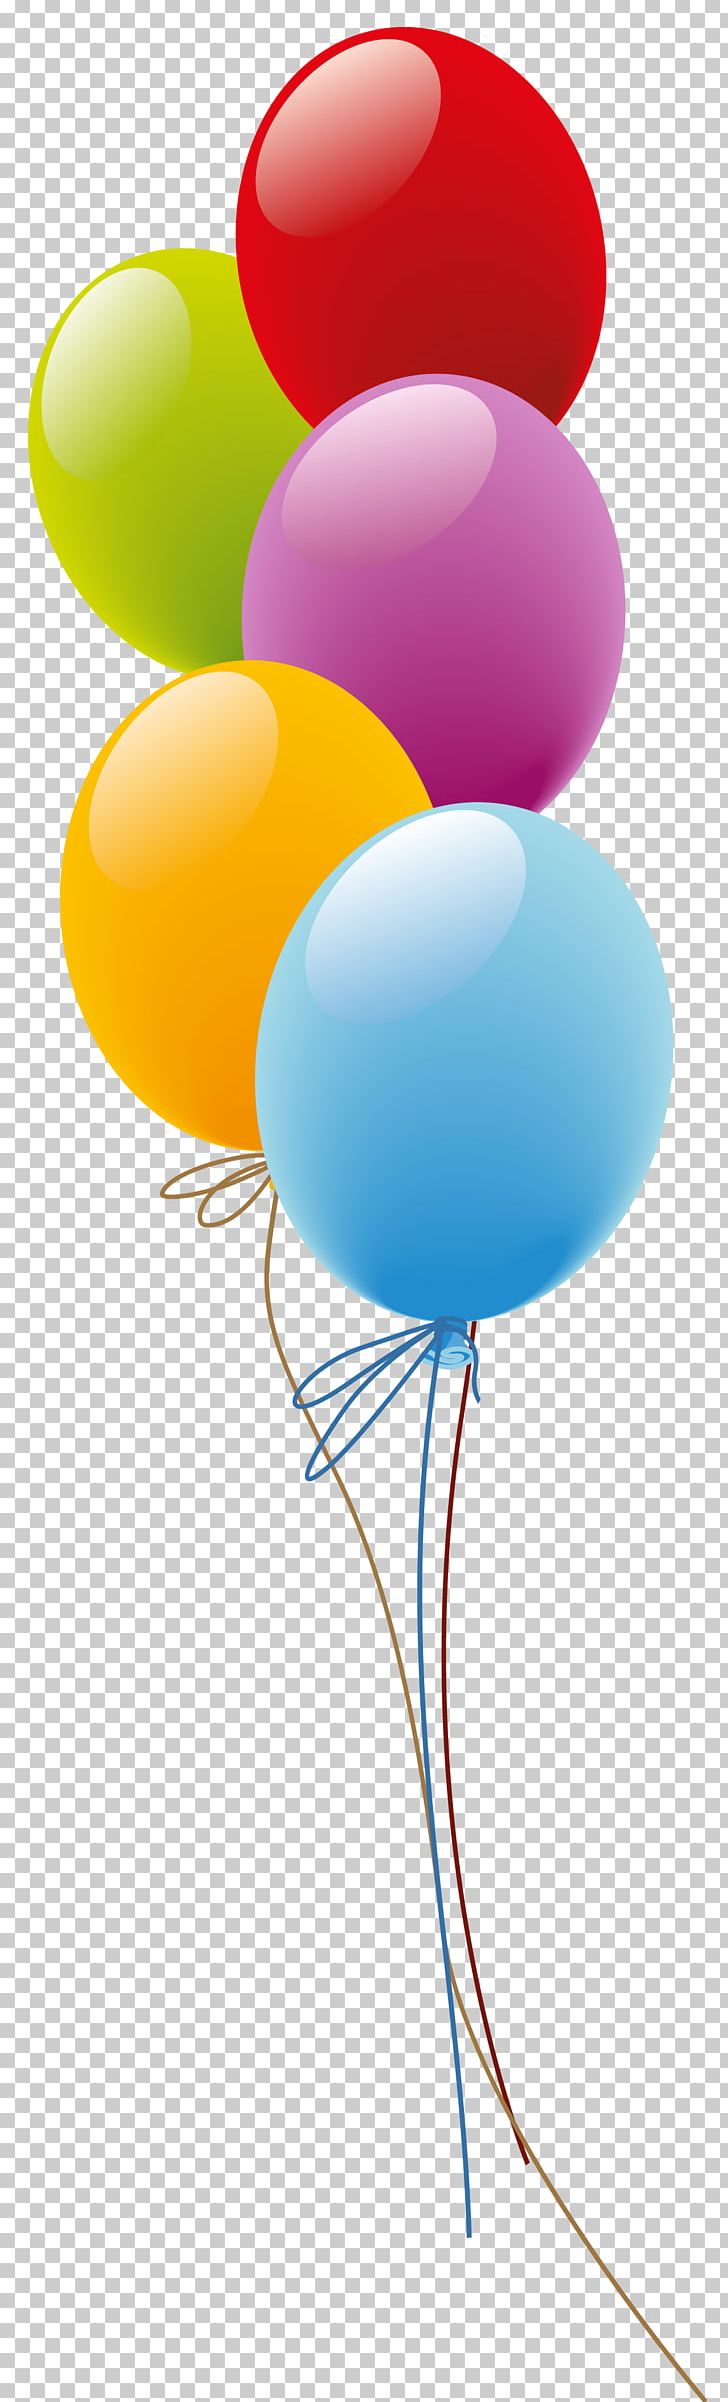 Balloon Birthday Gift Flower Delivery PNG, Clipart, Anniversary, Balloon, Balloons, Birthday, Birthday Cake Free PNG Download